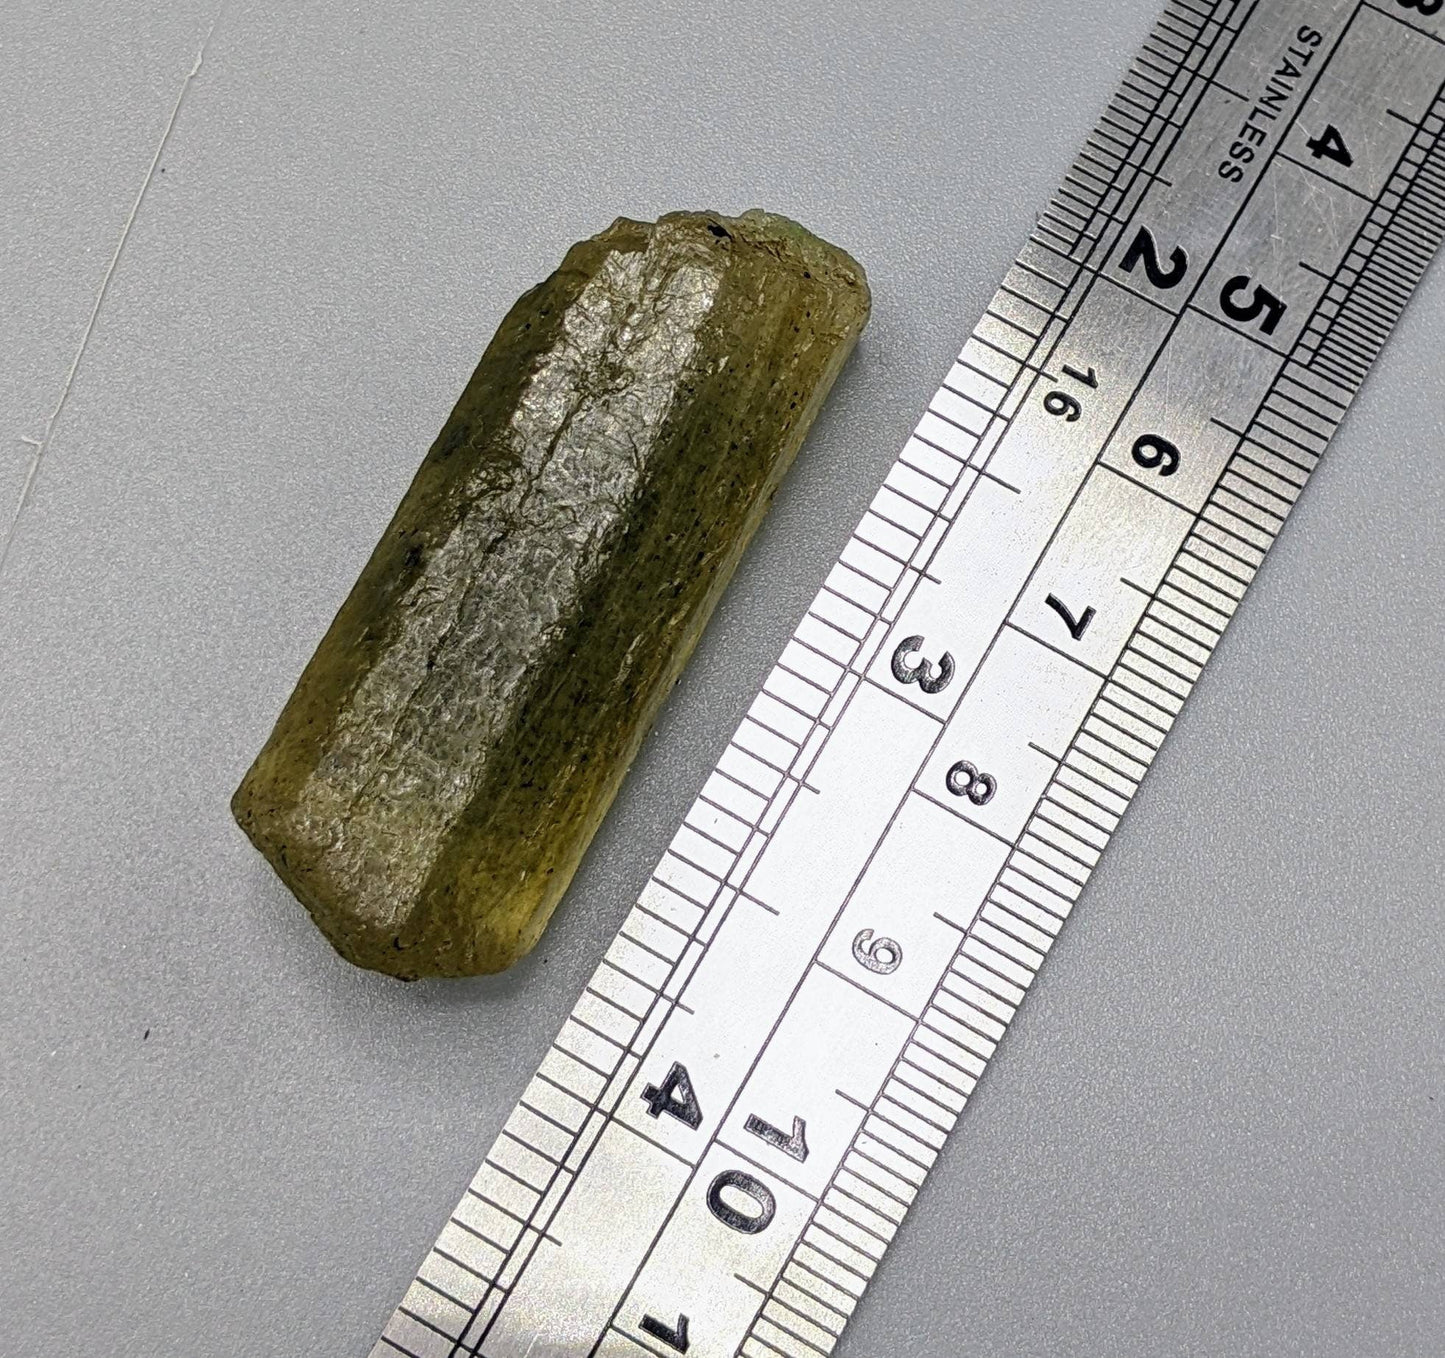 ARSAA GEMS AND MINERALSNatural fine quality beautiful 17.4 grams green scapolite crystal - Premium  from ARSAA GEMS AND MINERALS - Just $30.00! Shop now at ARSAA GEMS AND MINERALS